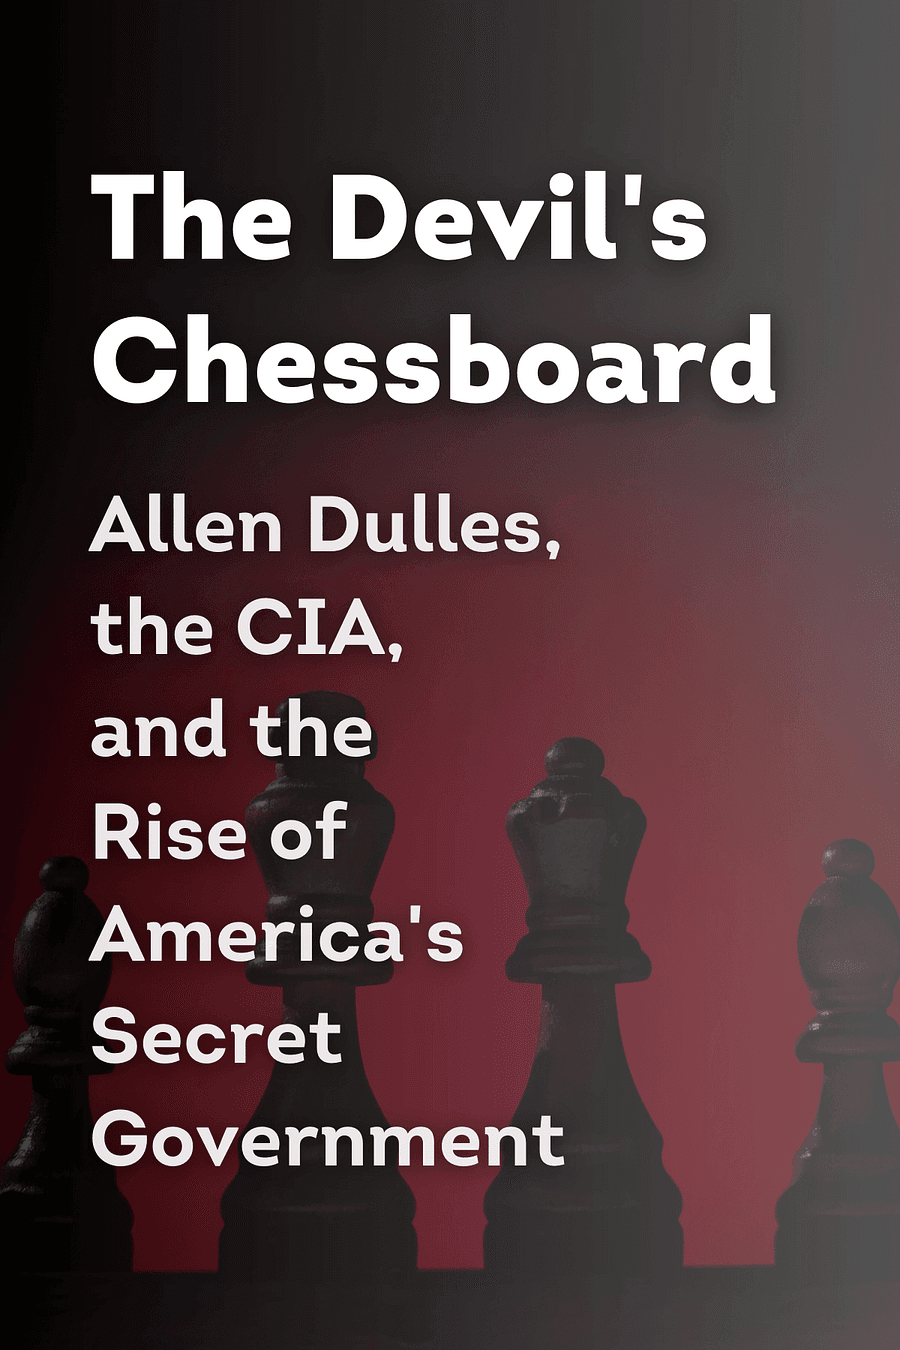 The Devil's Chessboard by David Talbot - Book Summary